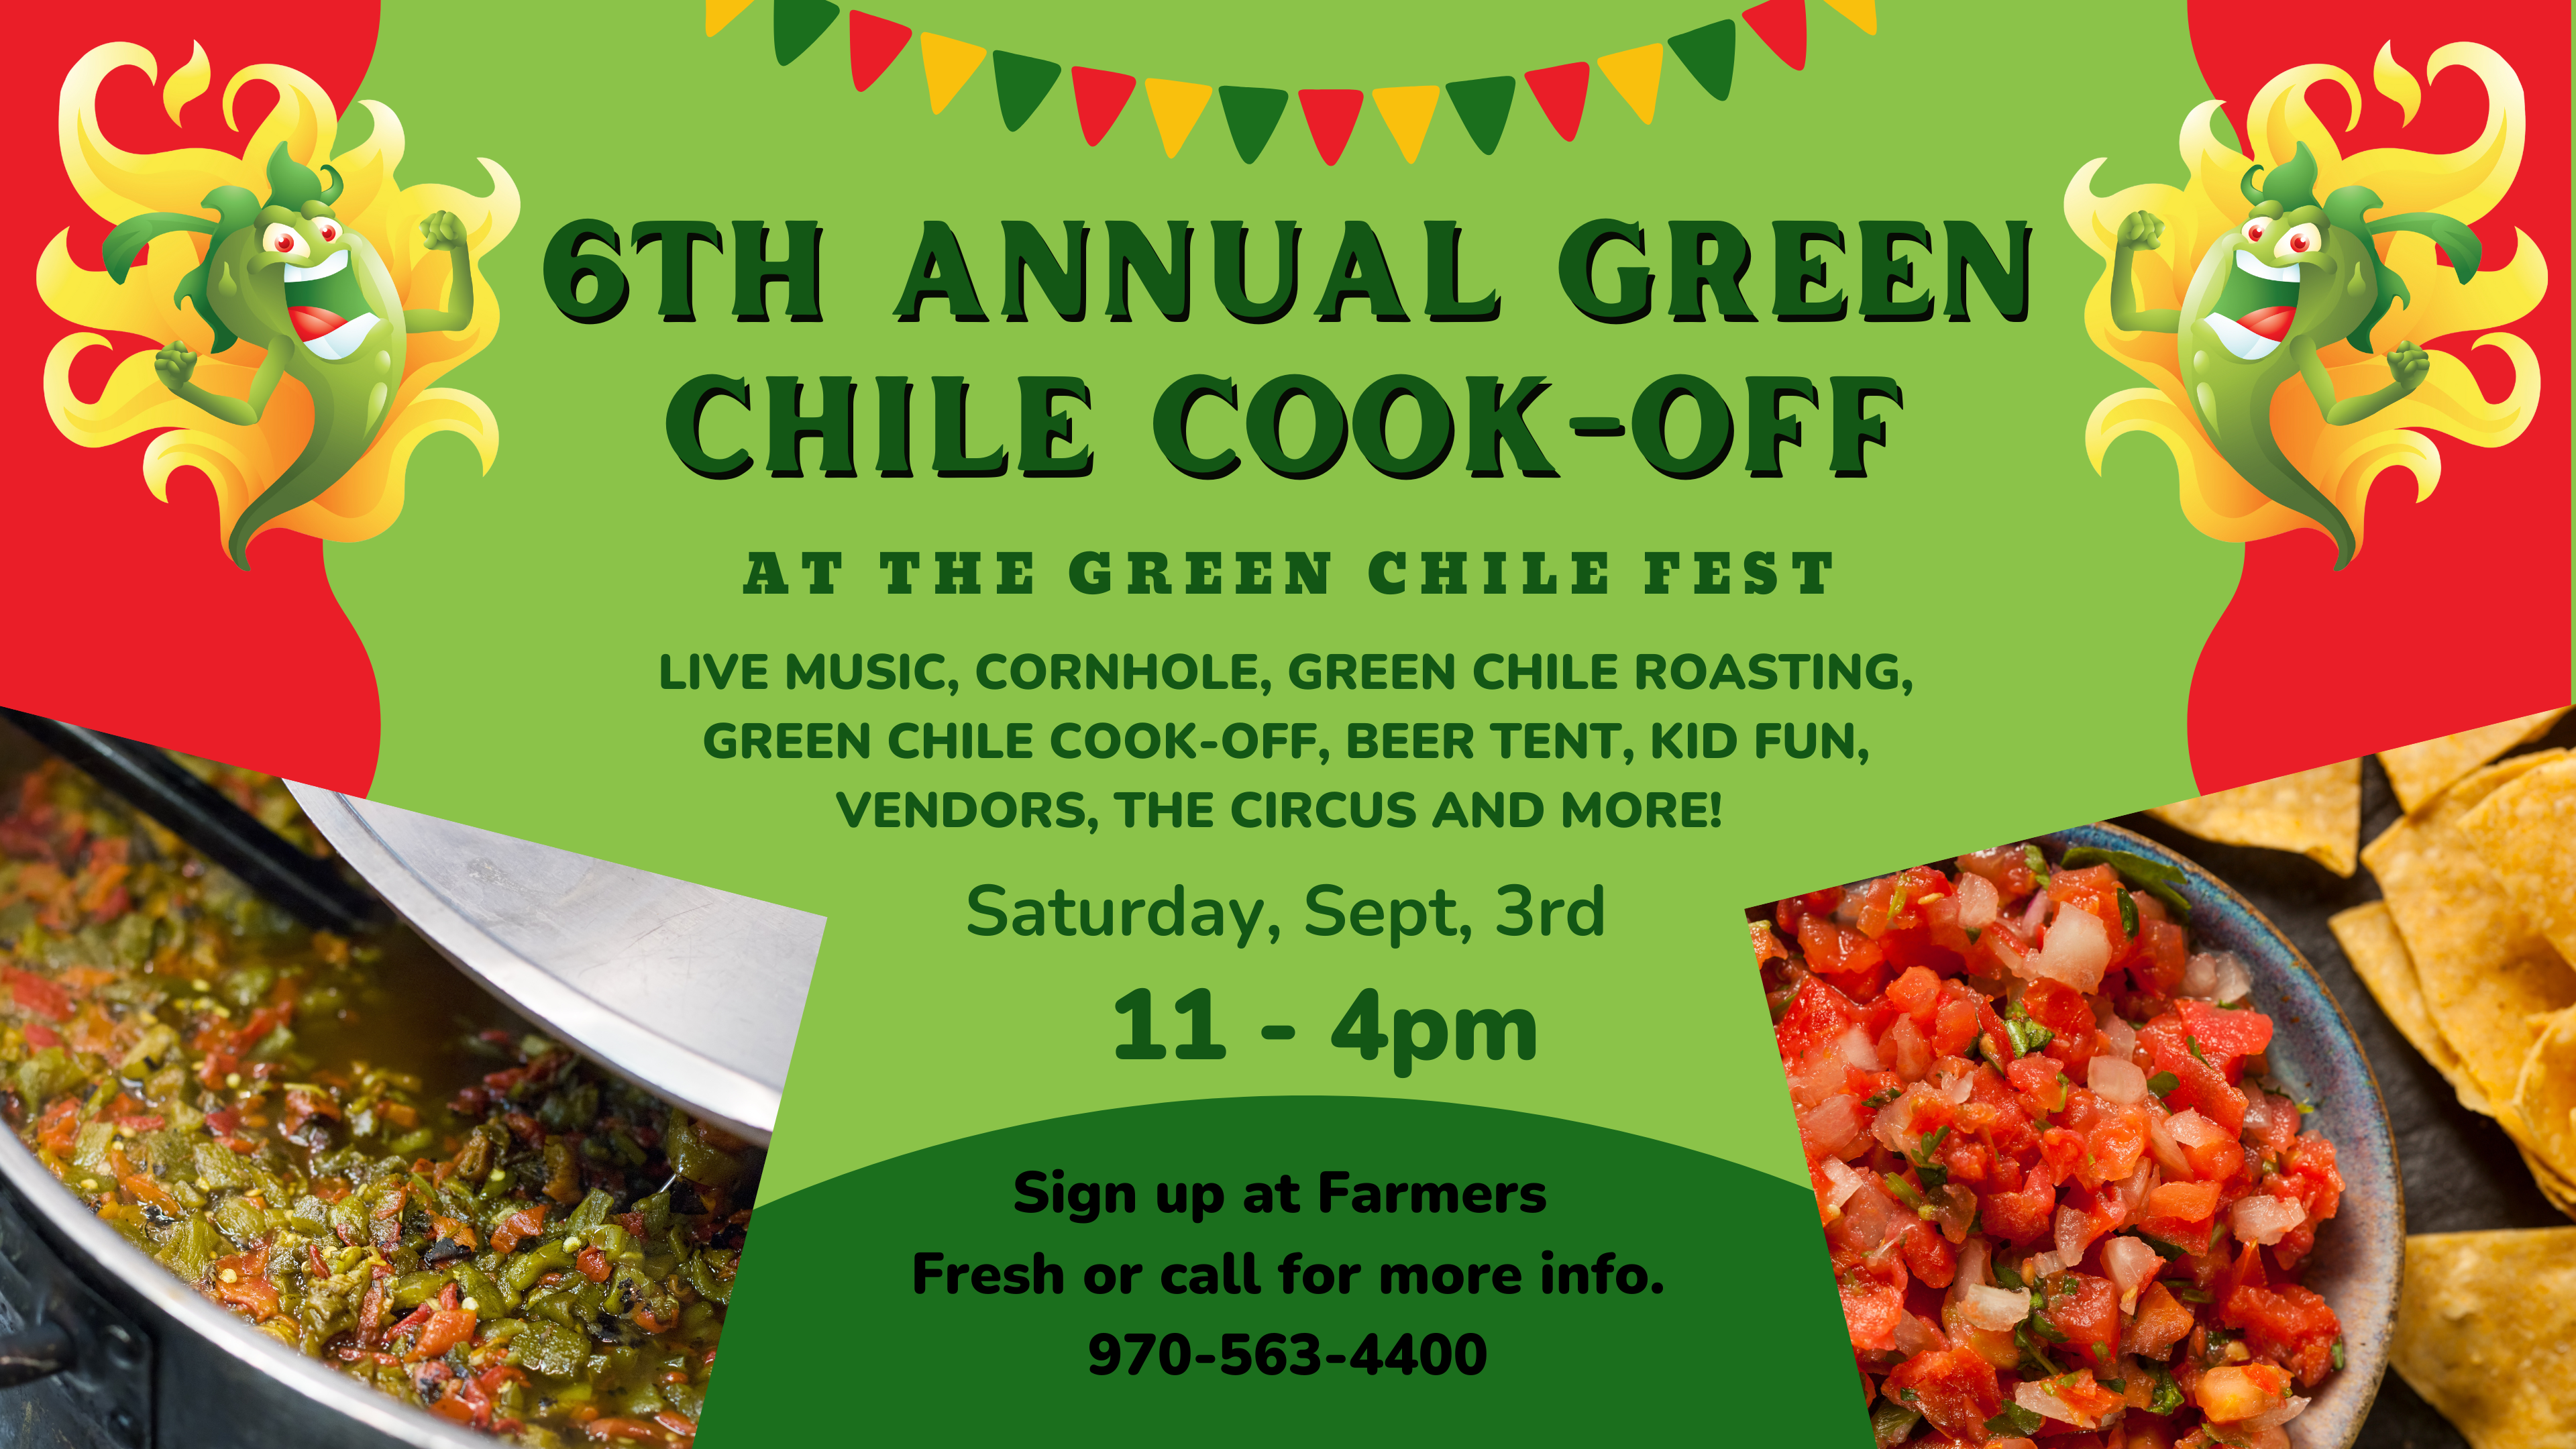 6th Annual Green Chile Cook-off